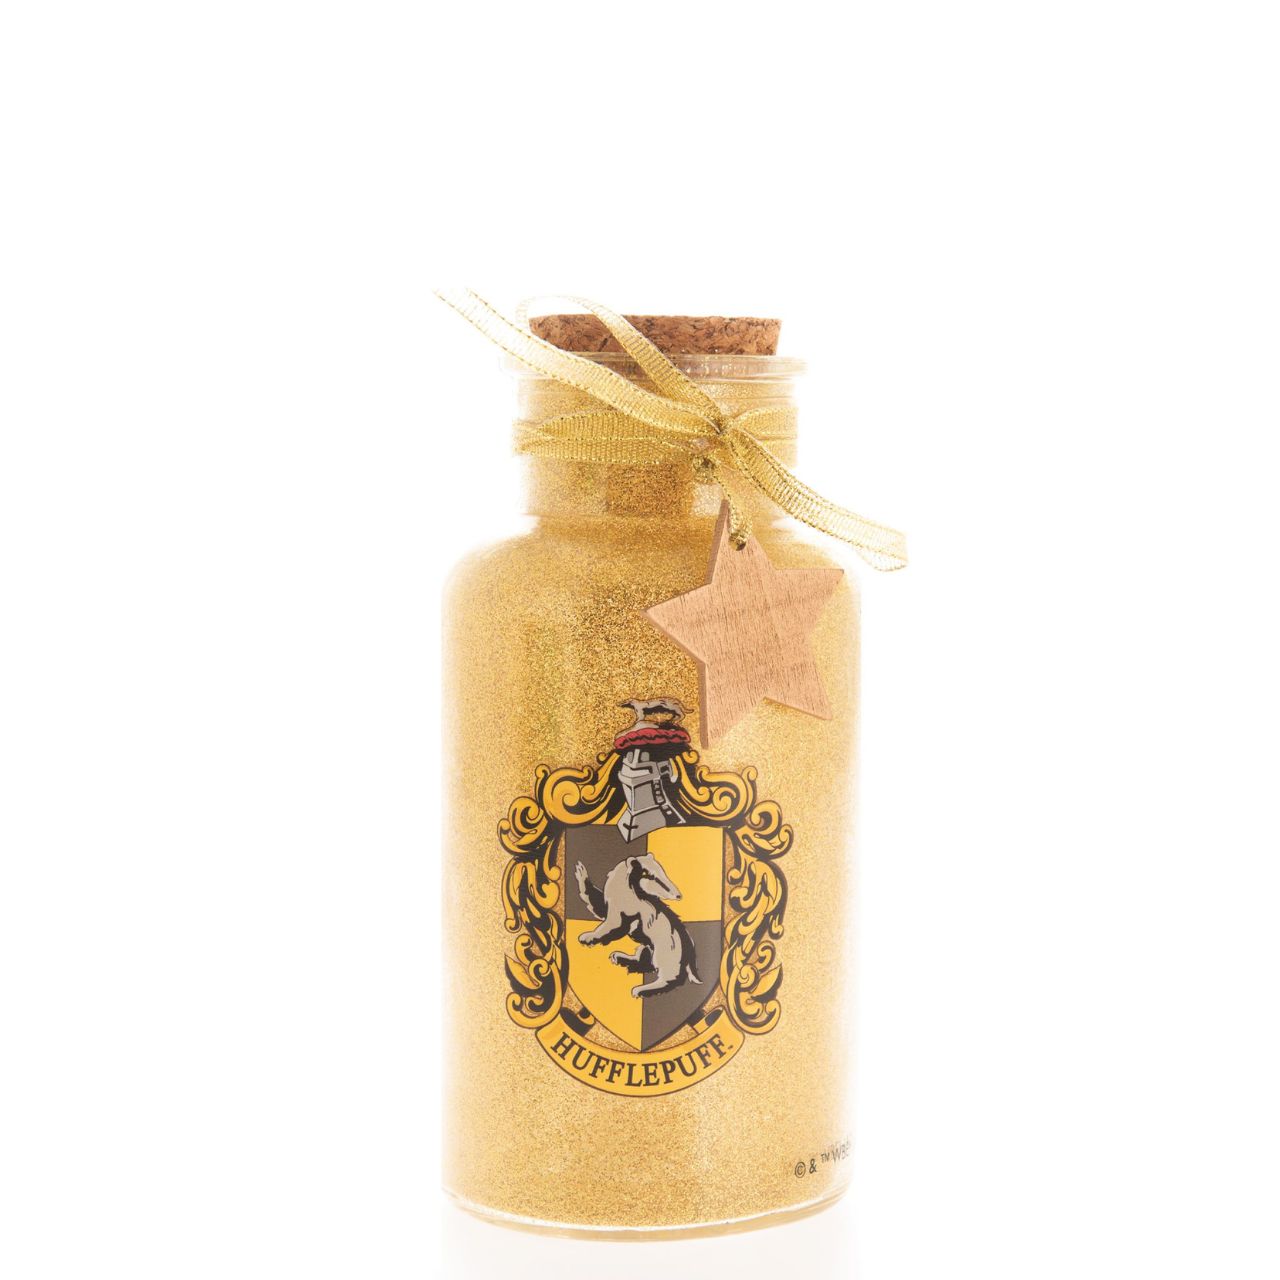 Harry Potter LED Light Up Glass Jar House - Hufflepuff  Lumos maxima! Light up your home this Christmas with these LED glass jar lights. With a glitter design and featuring all four houses, these accessories are sure to add a sprinkle of magic.